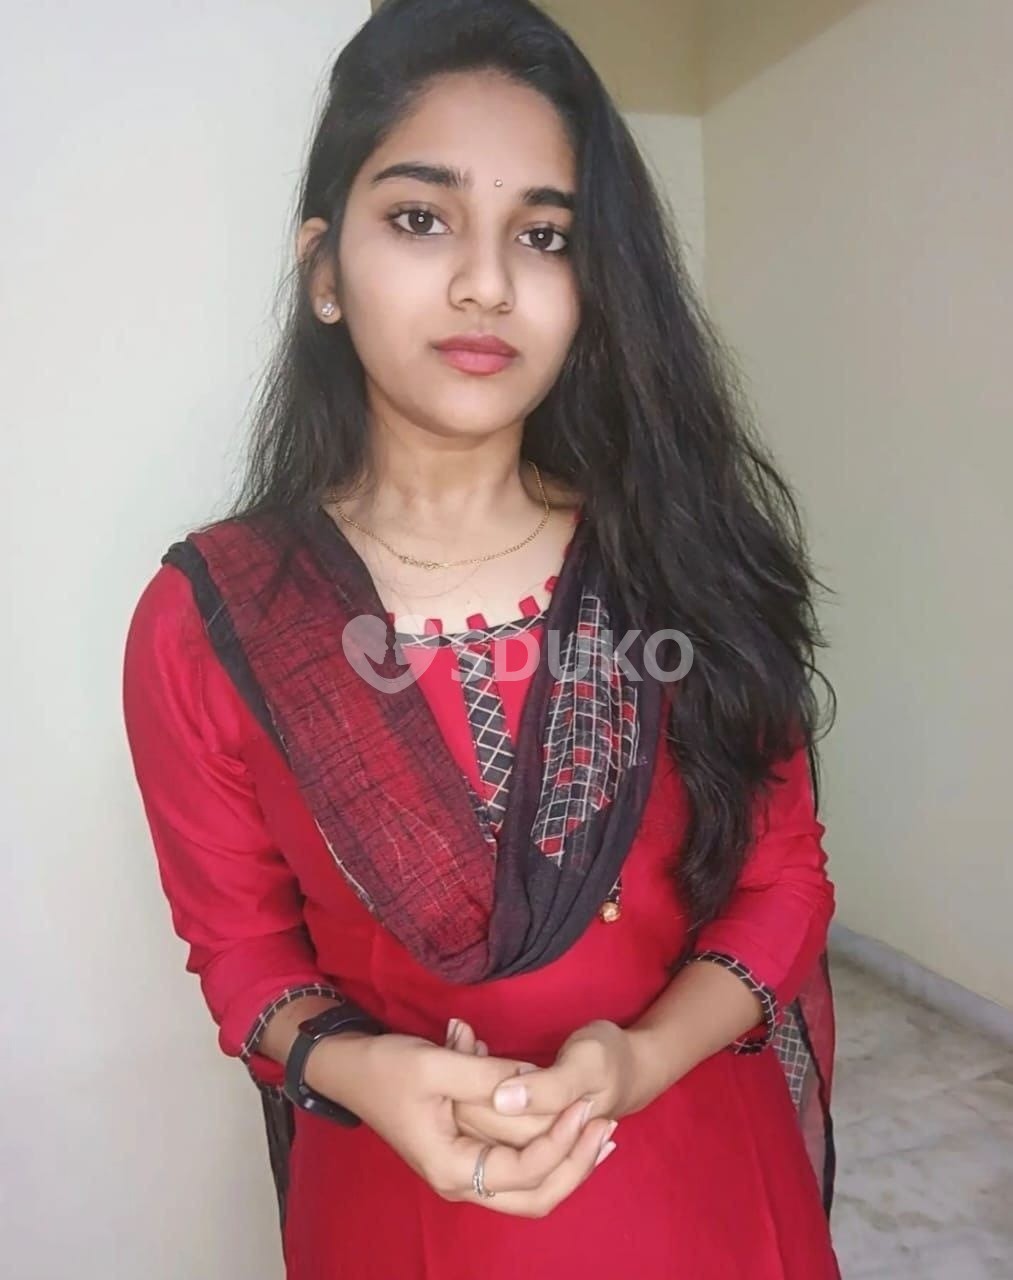 Kozhikod 77373//69894 high profile good looking girls low price available